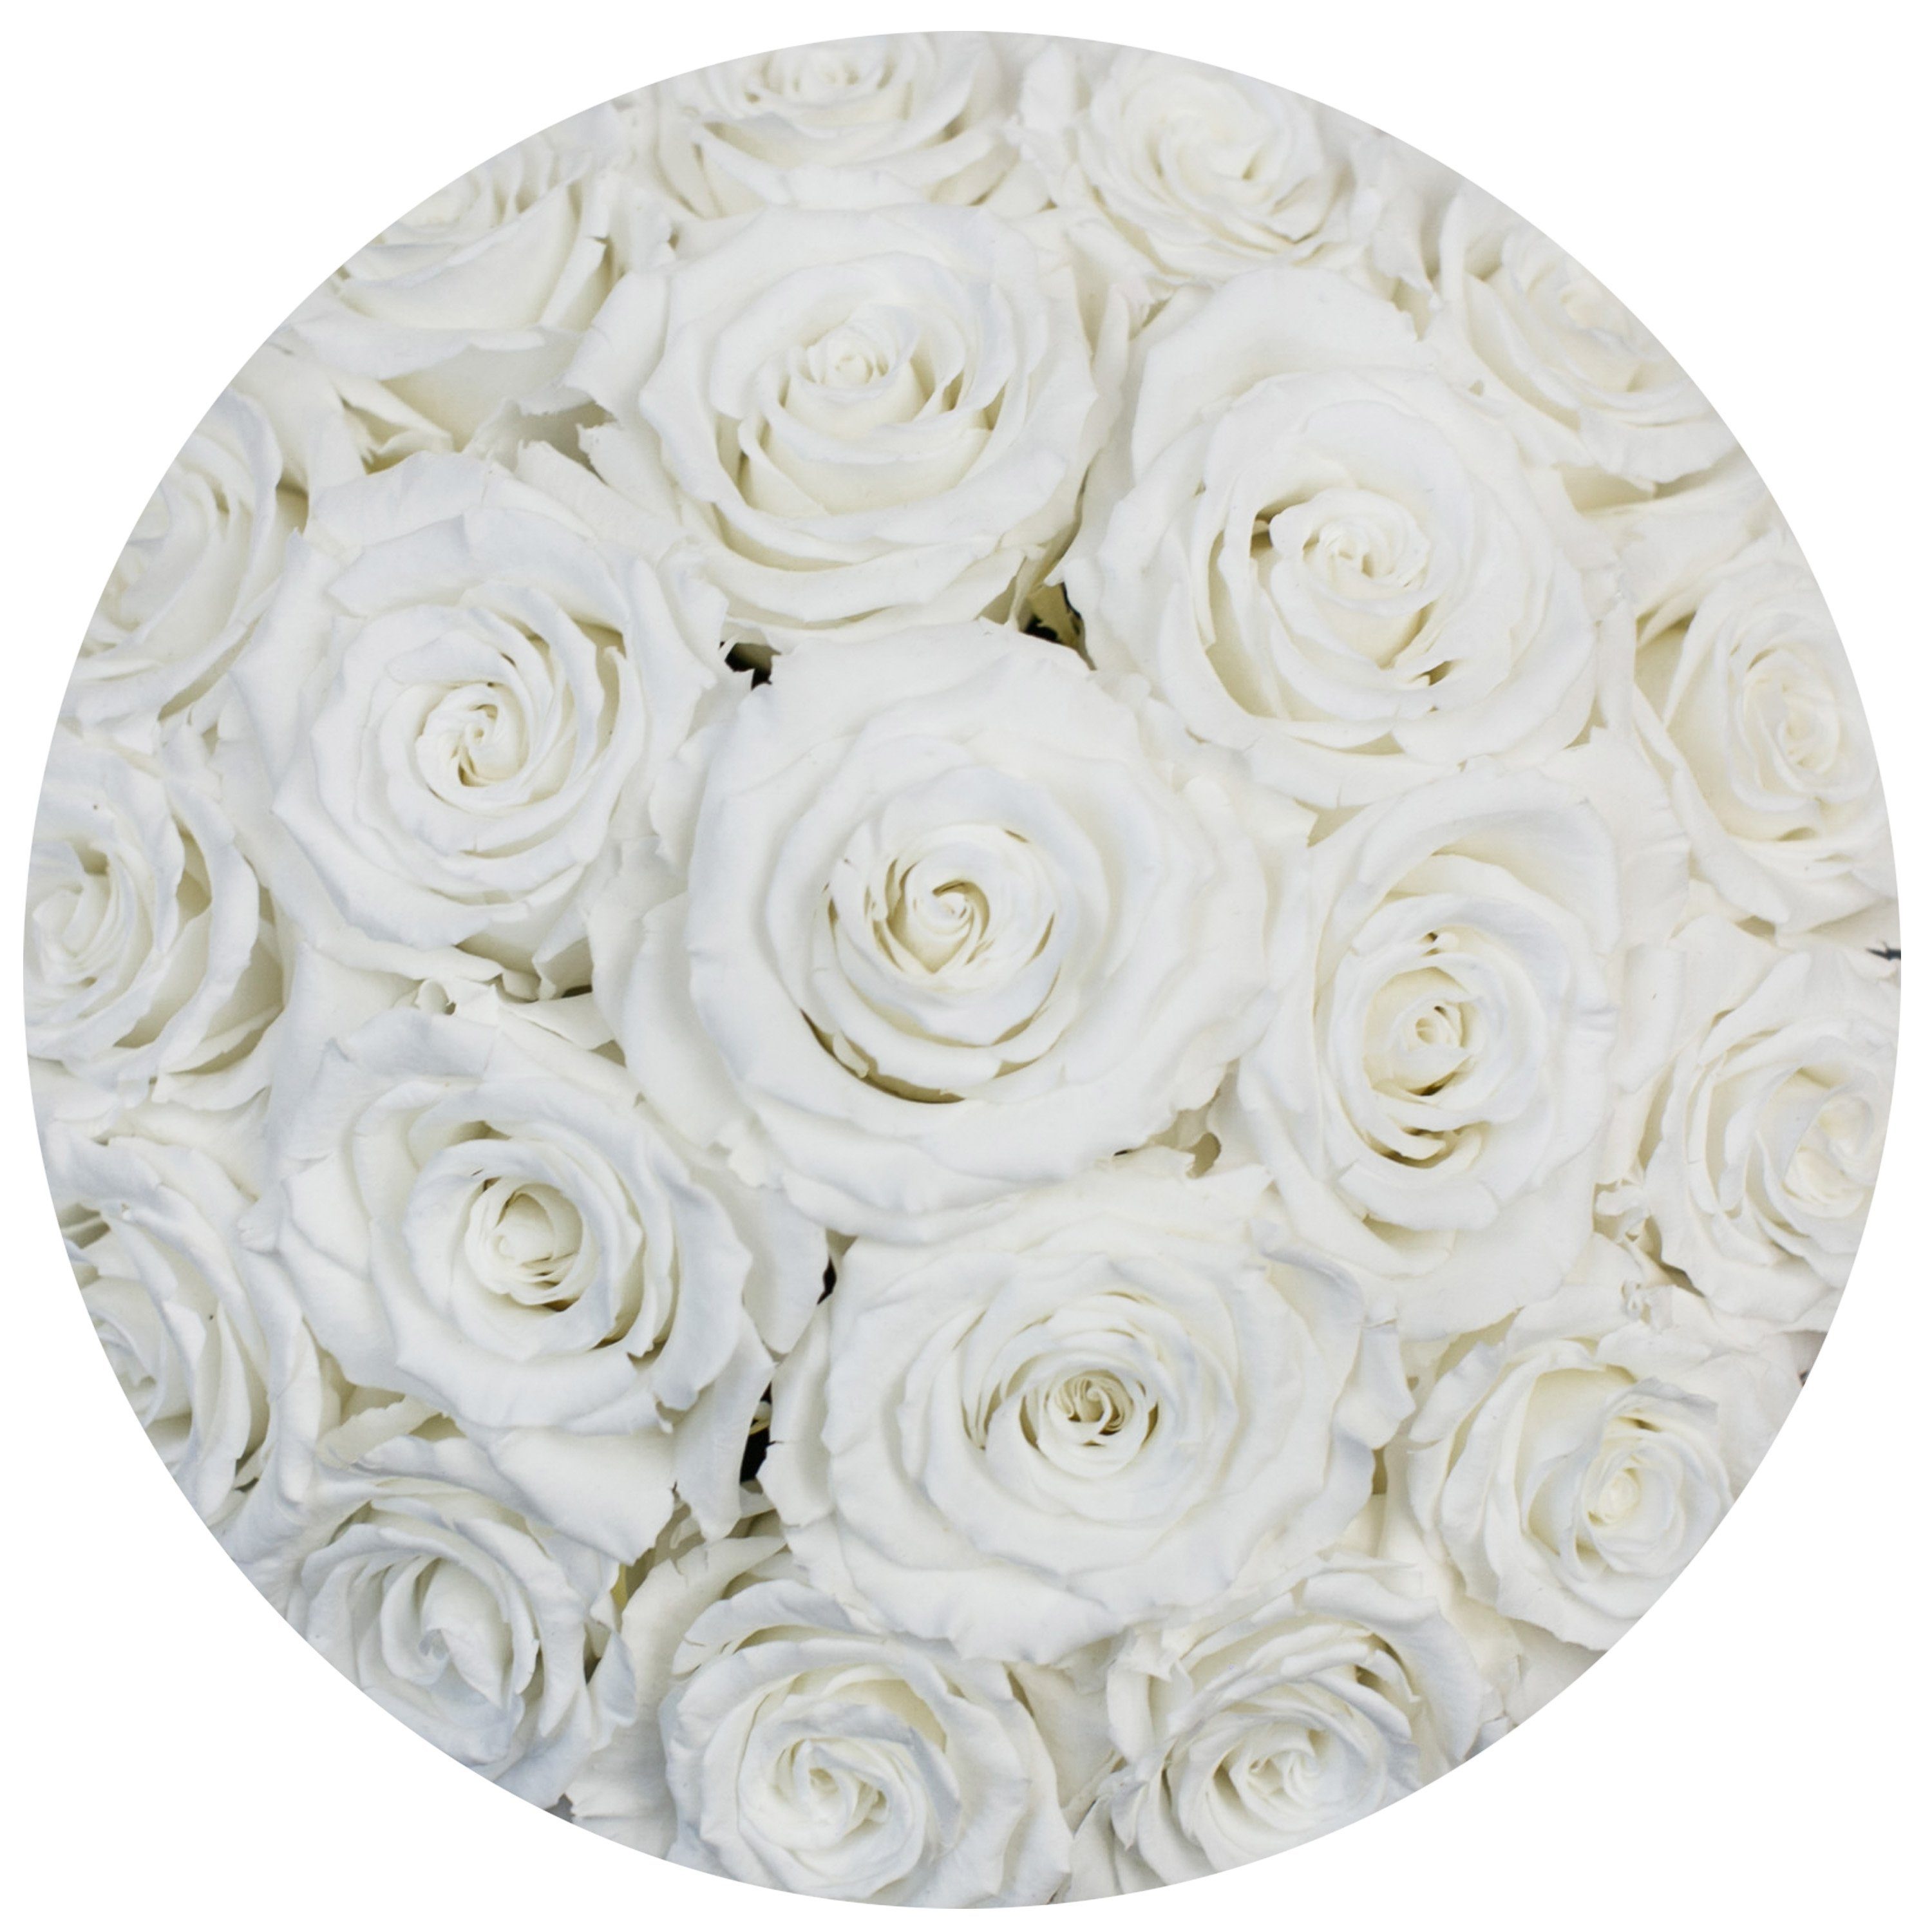 classic round box - hot-pink suede box - white roses ( dome ) white eternity roses - the million roses